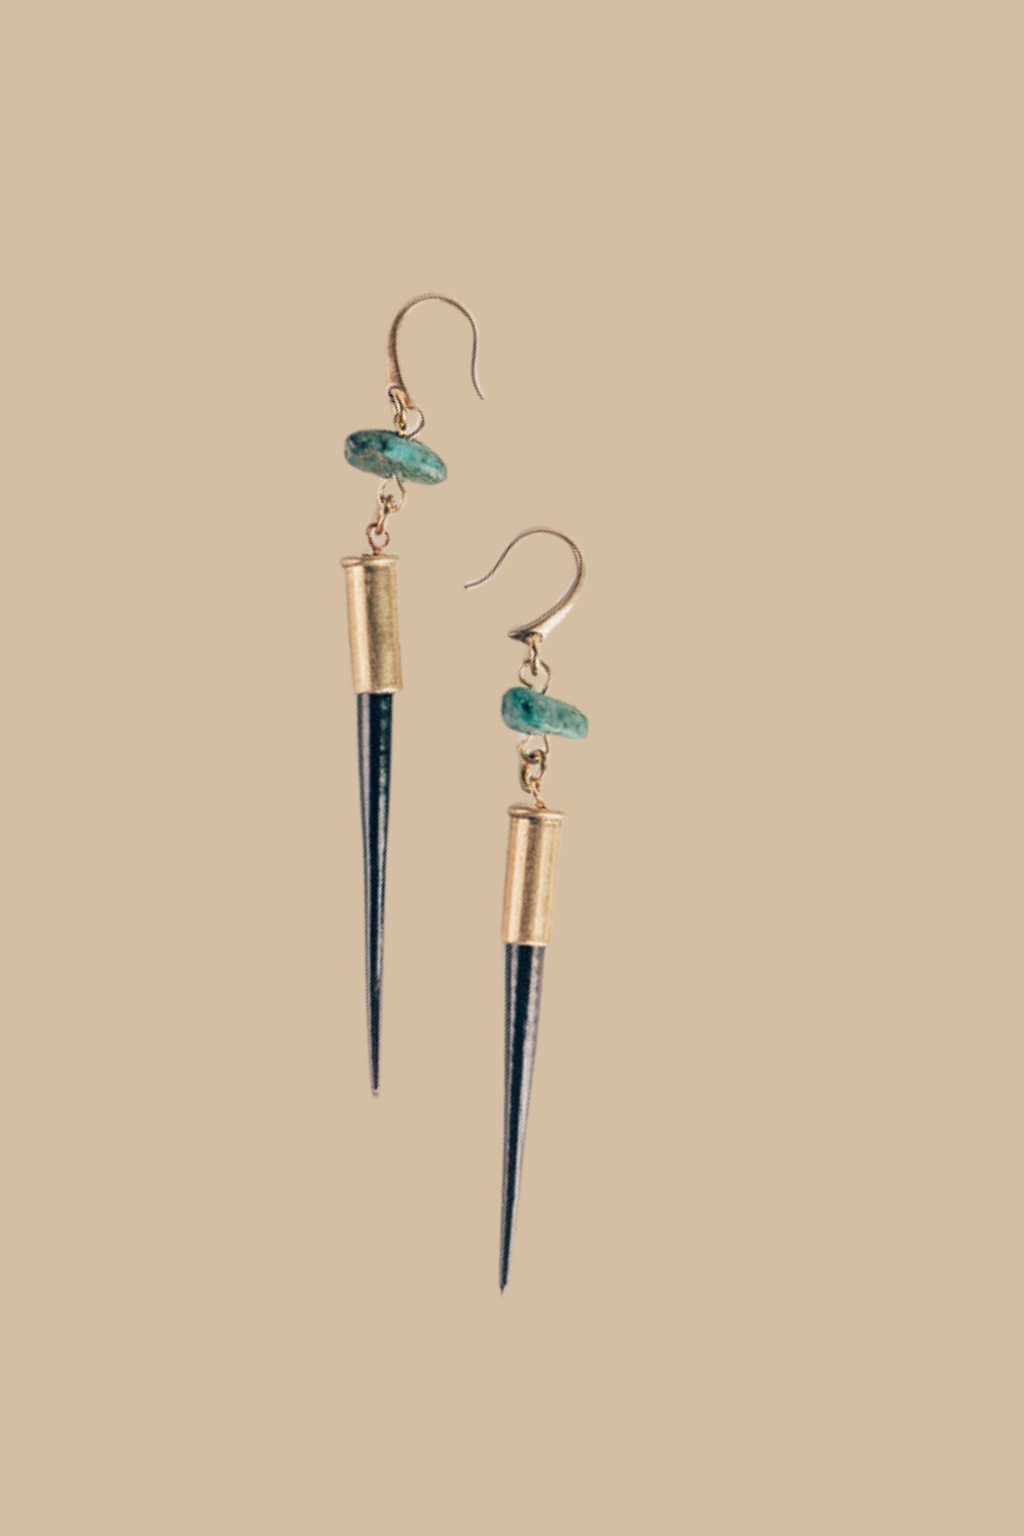 Quill and Turquoise Earrings